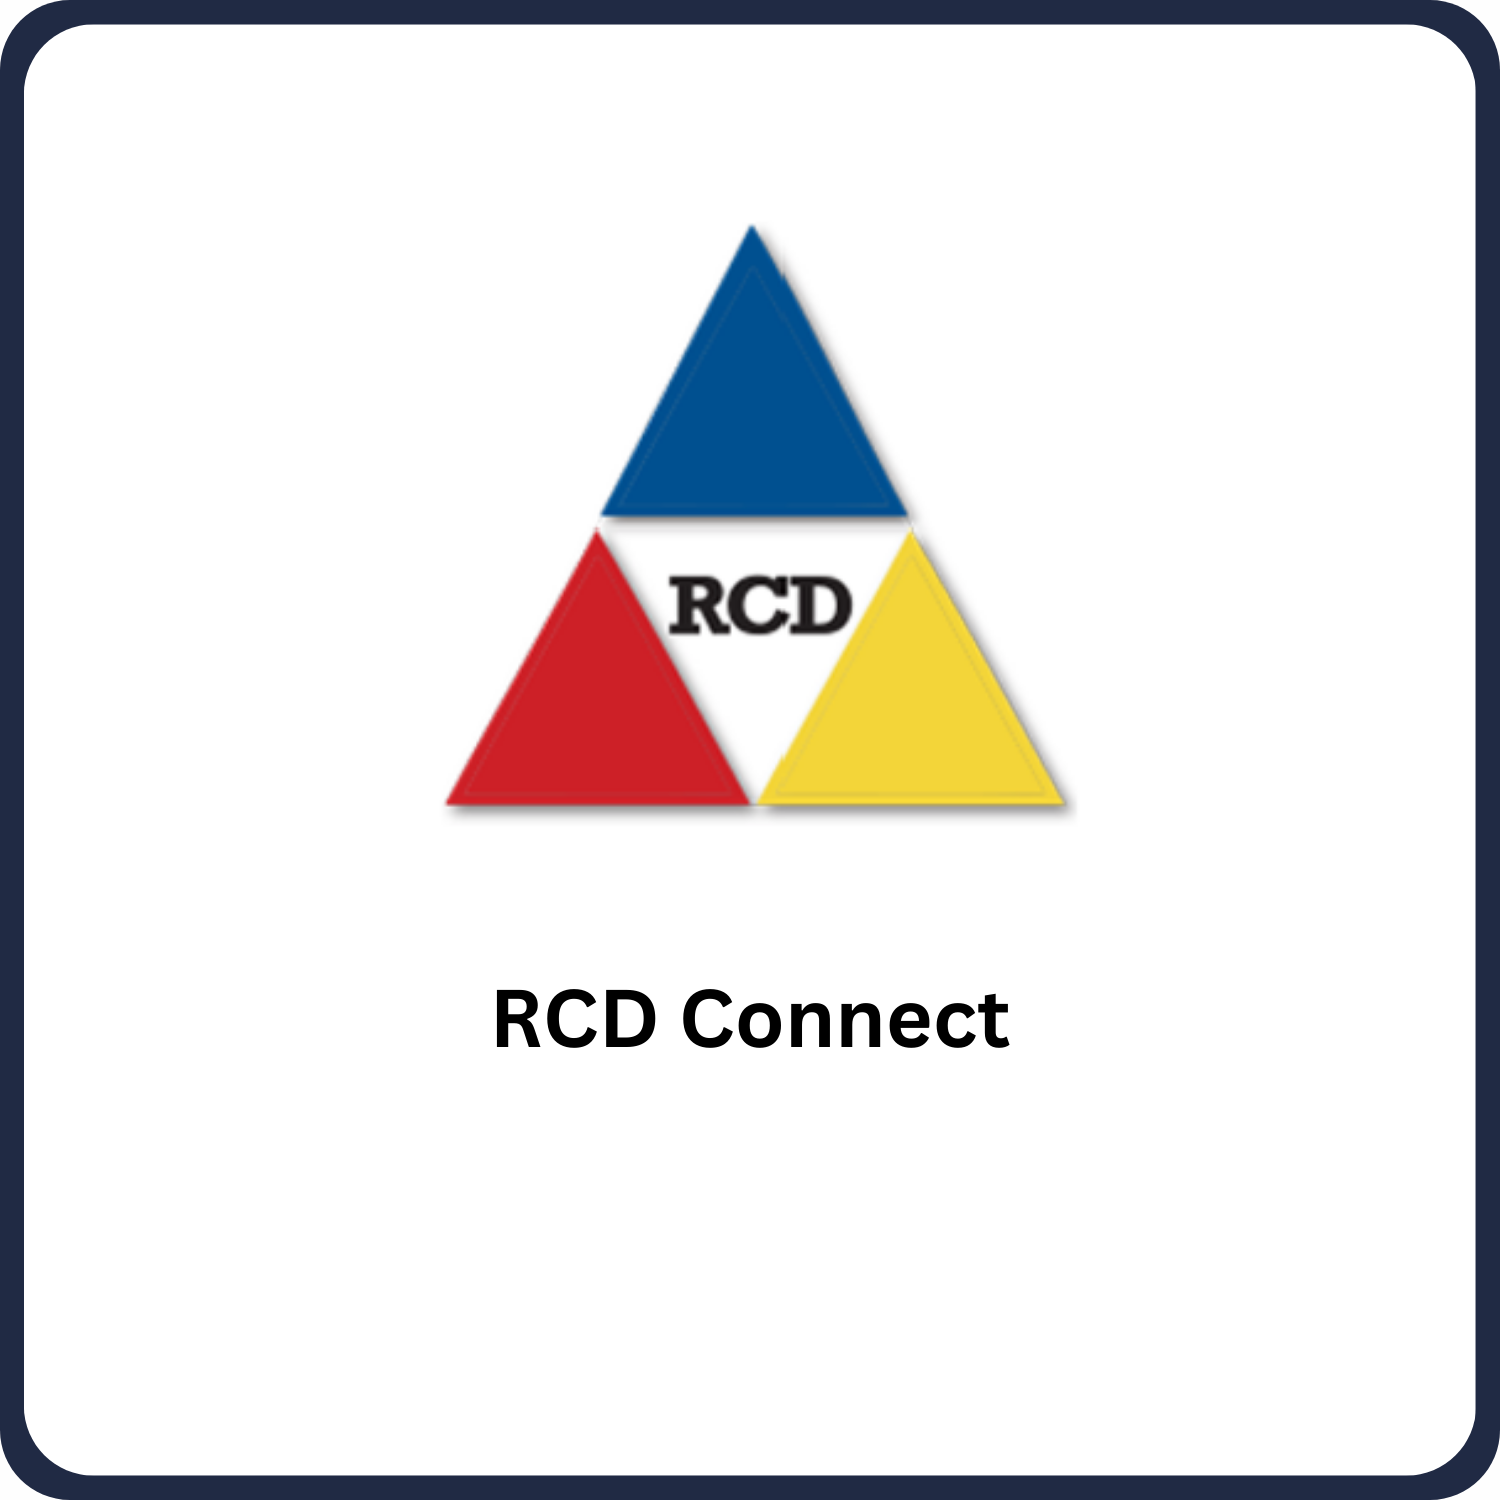 RCD Connect